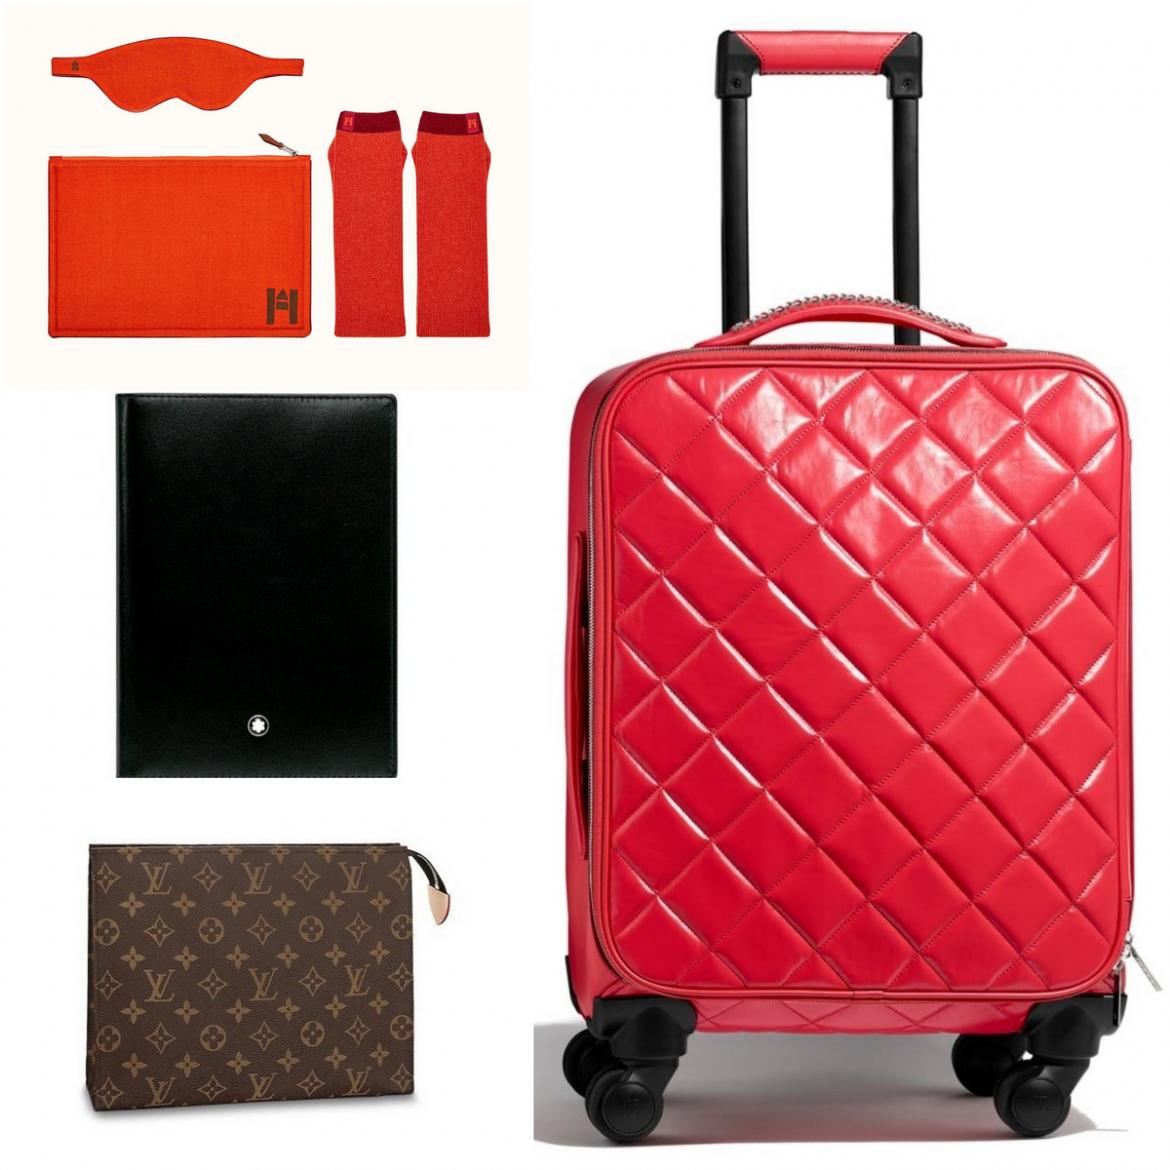 Hey girl boss! Here are some luxe travel accessories for first